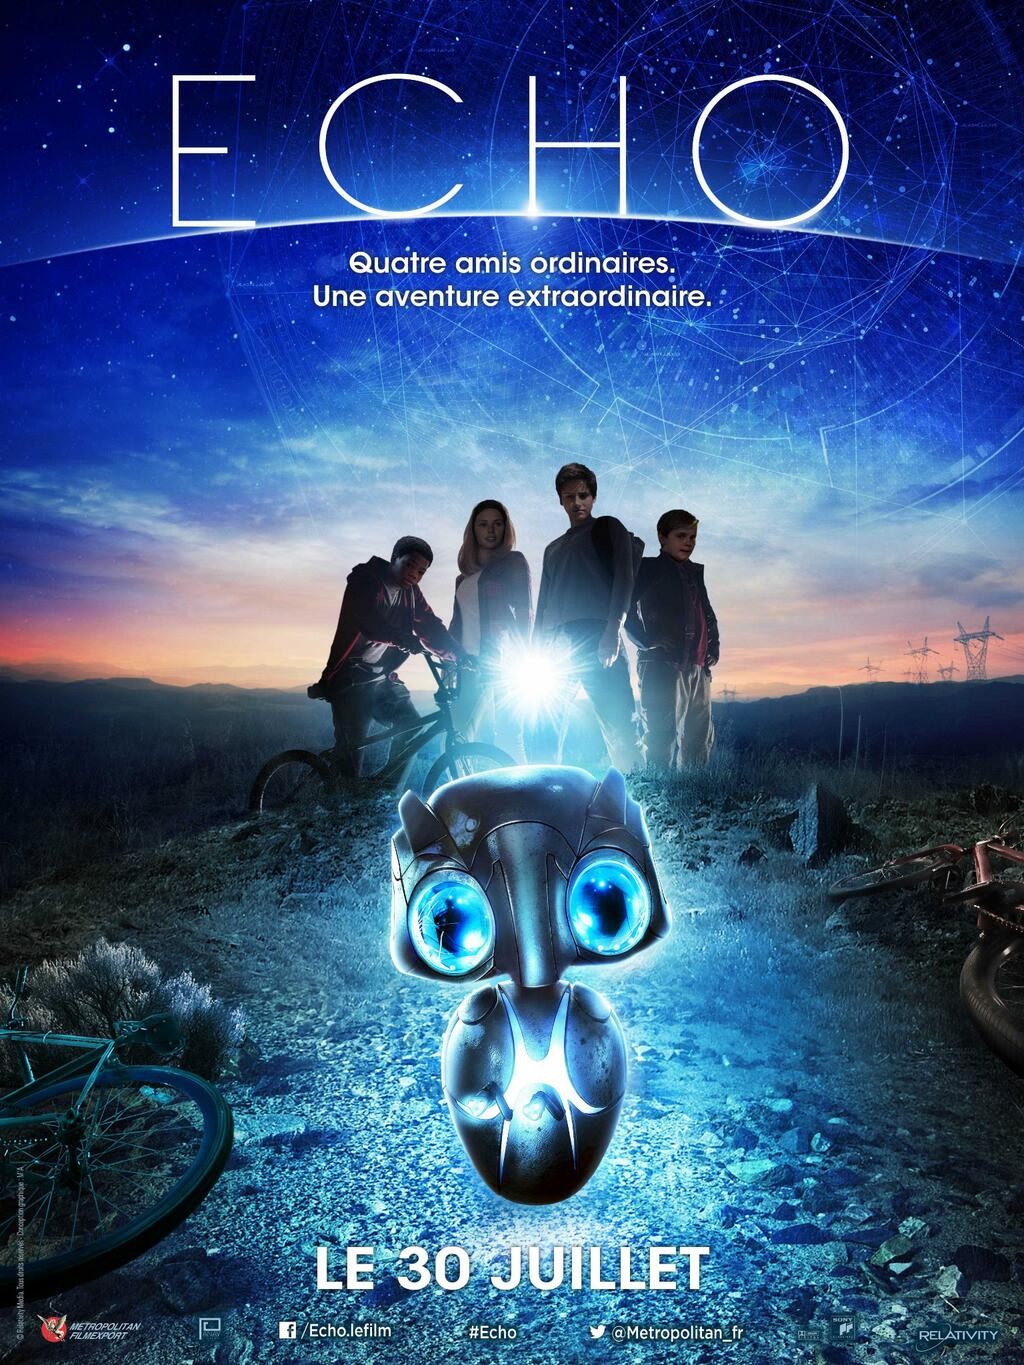 Earth To Echo #4